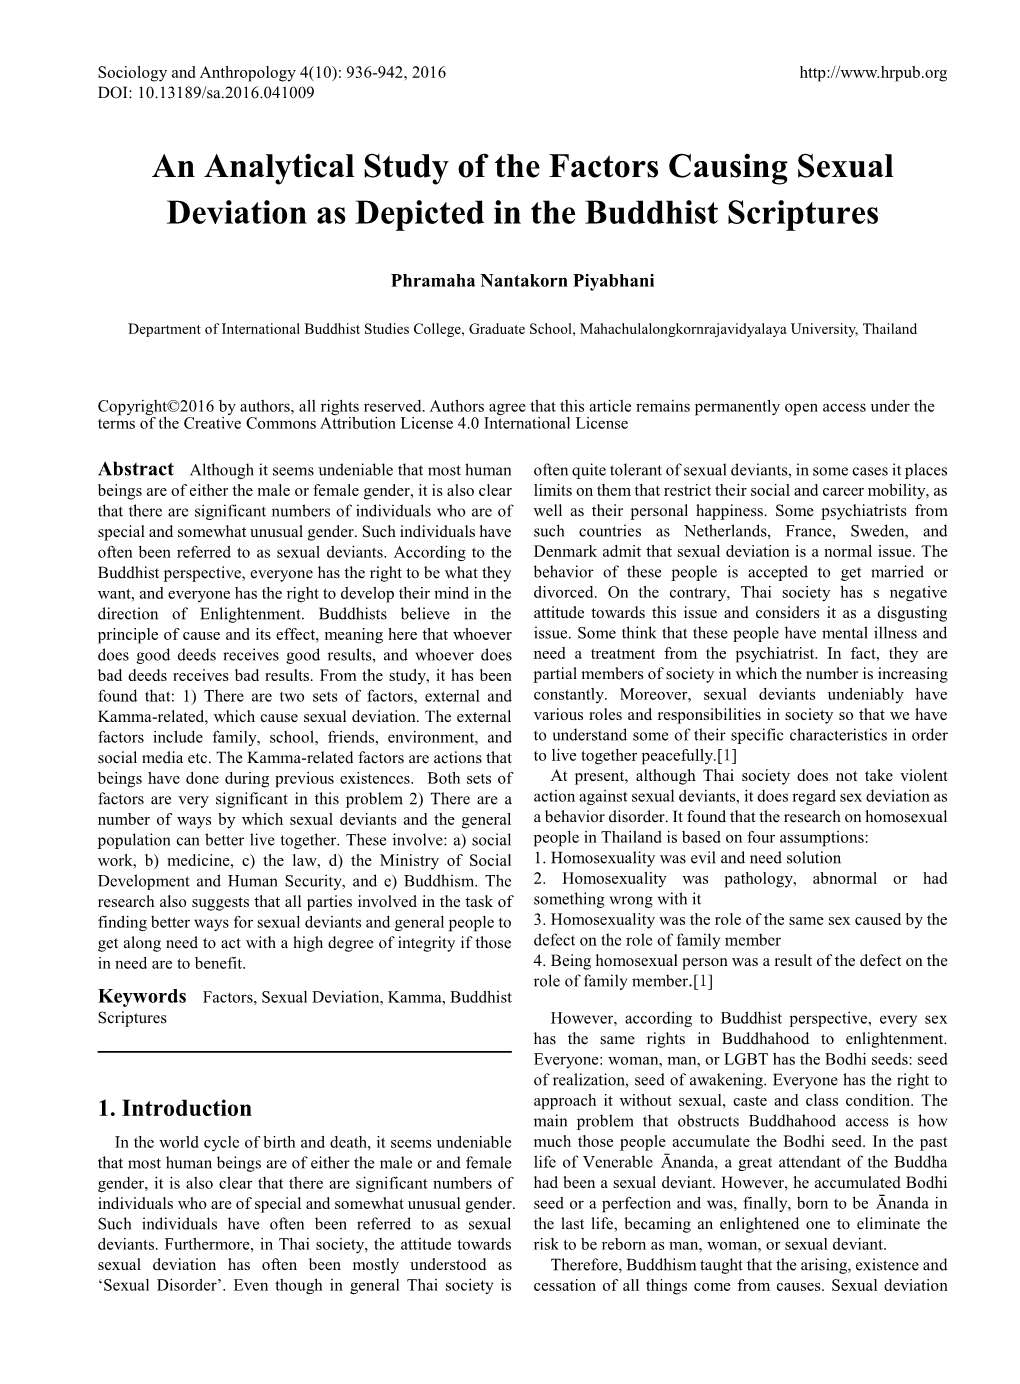 An Analytical Study of the Factors Causing Sexual Deviation As Depicted in the Buddhist Scriptures